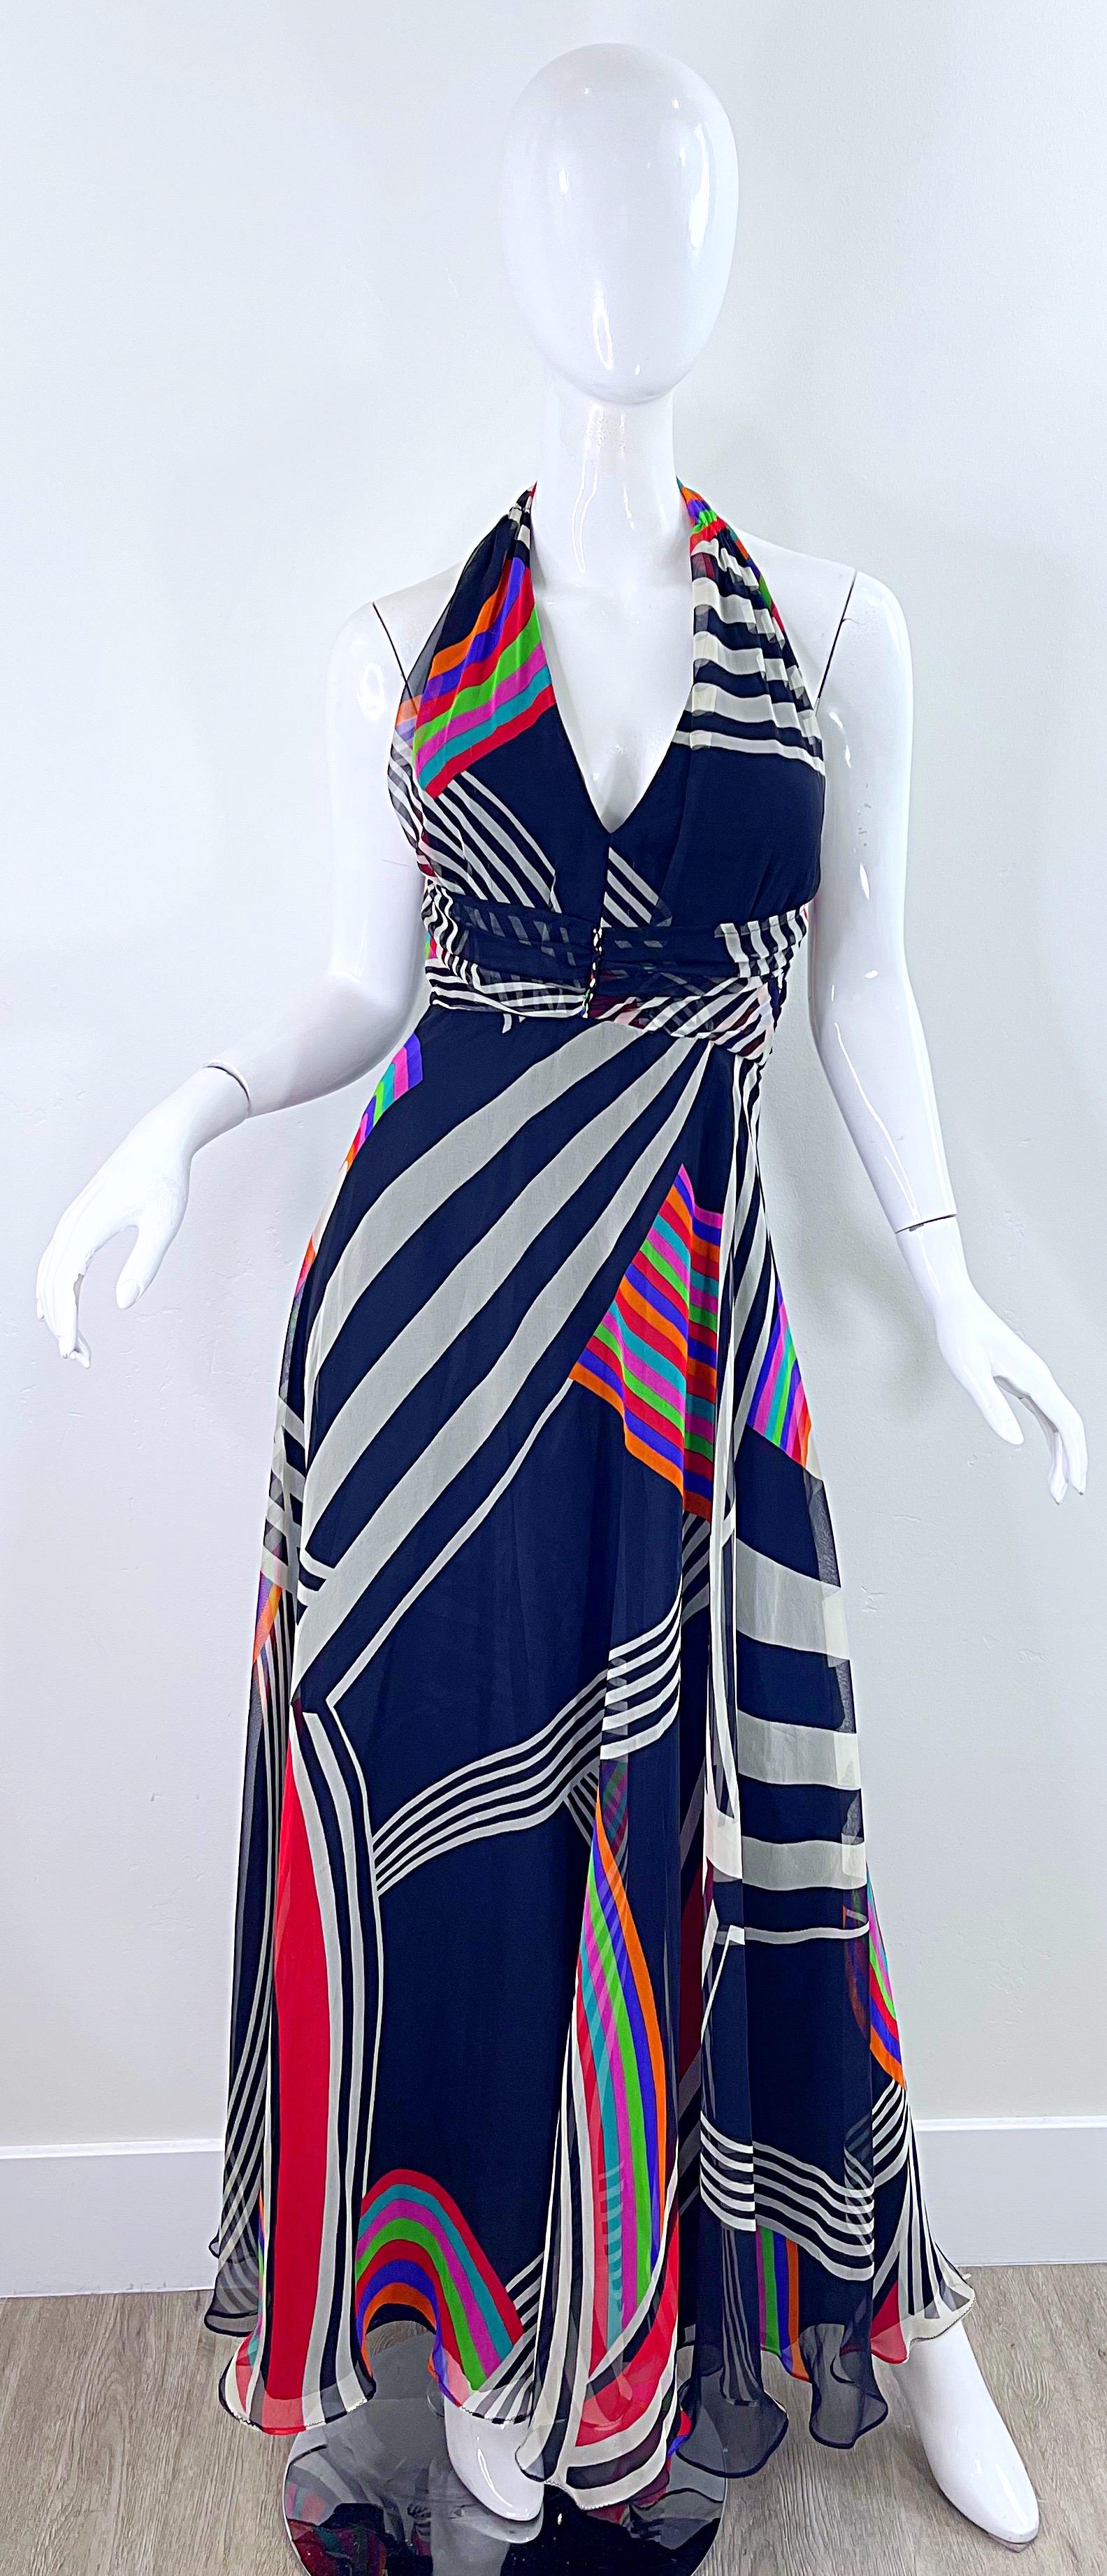 Amazing 1970s PUSZTA black abstract print striped chiffon maxi dress ! Features bright colors of red, blue, orange, pink, green, turquoise, and white on a black background. Hidden zipper. Up the back.Perfect for any day or evening event. Pair with